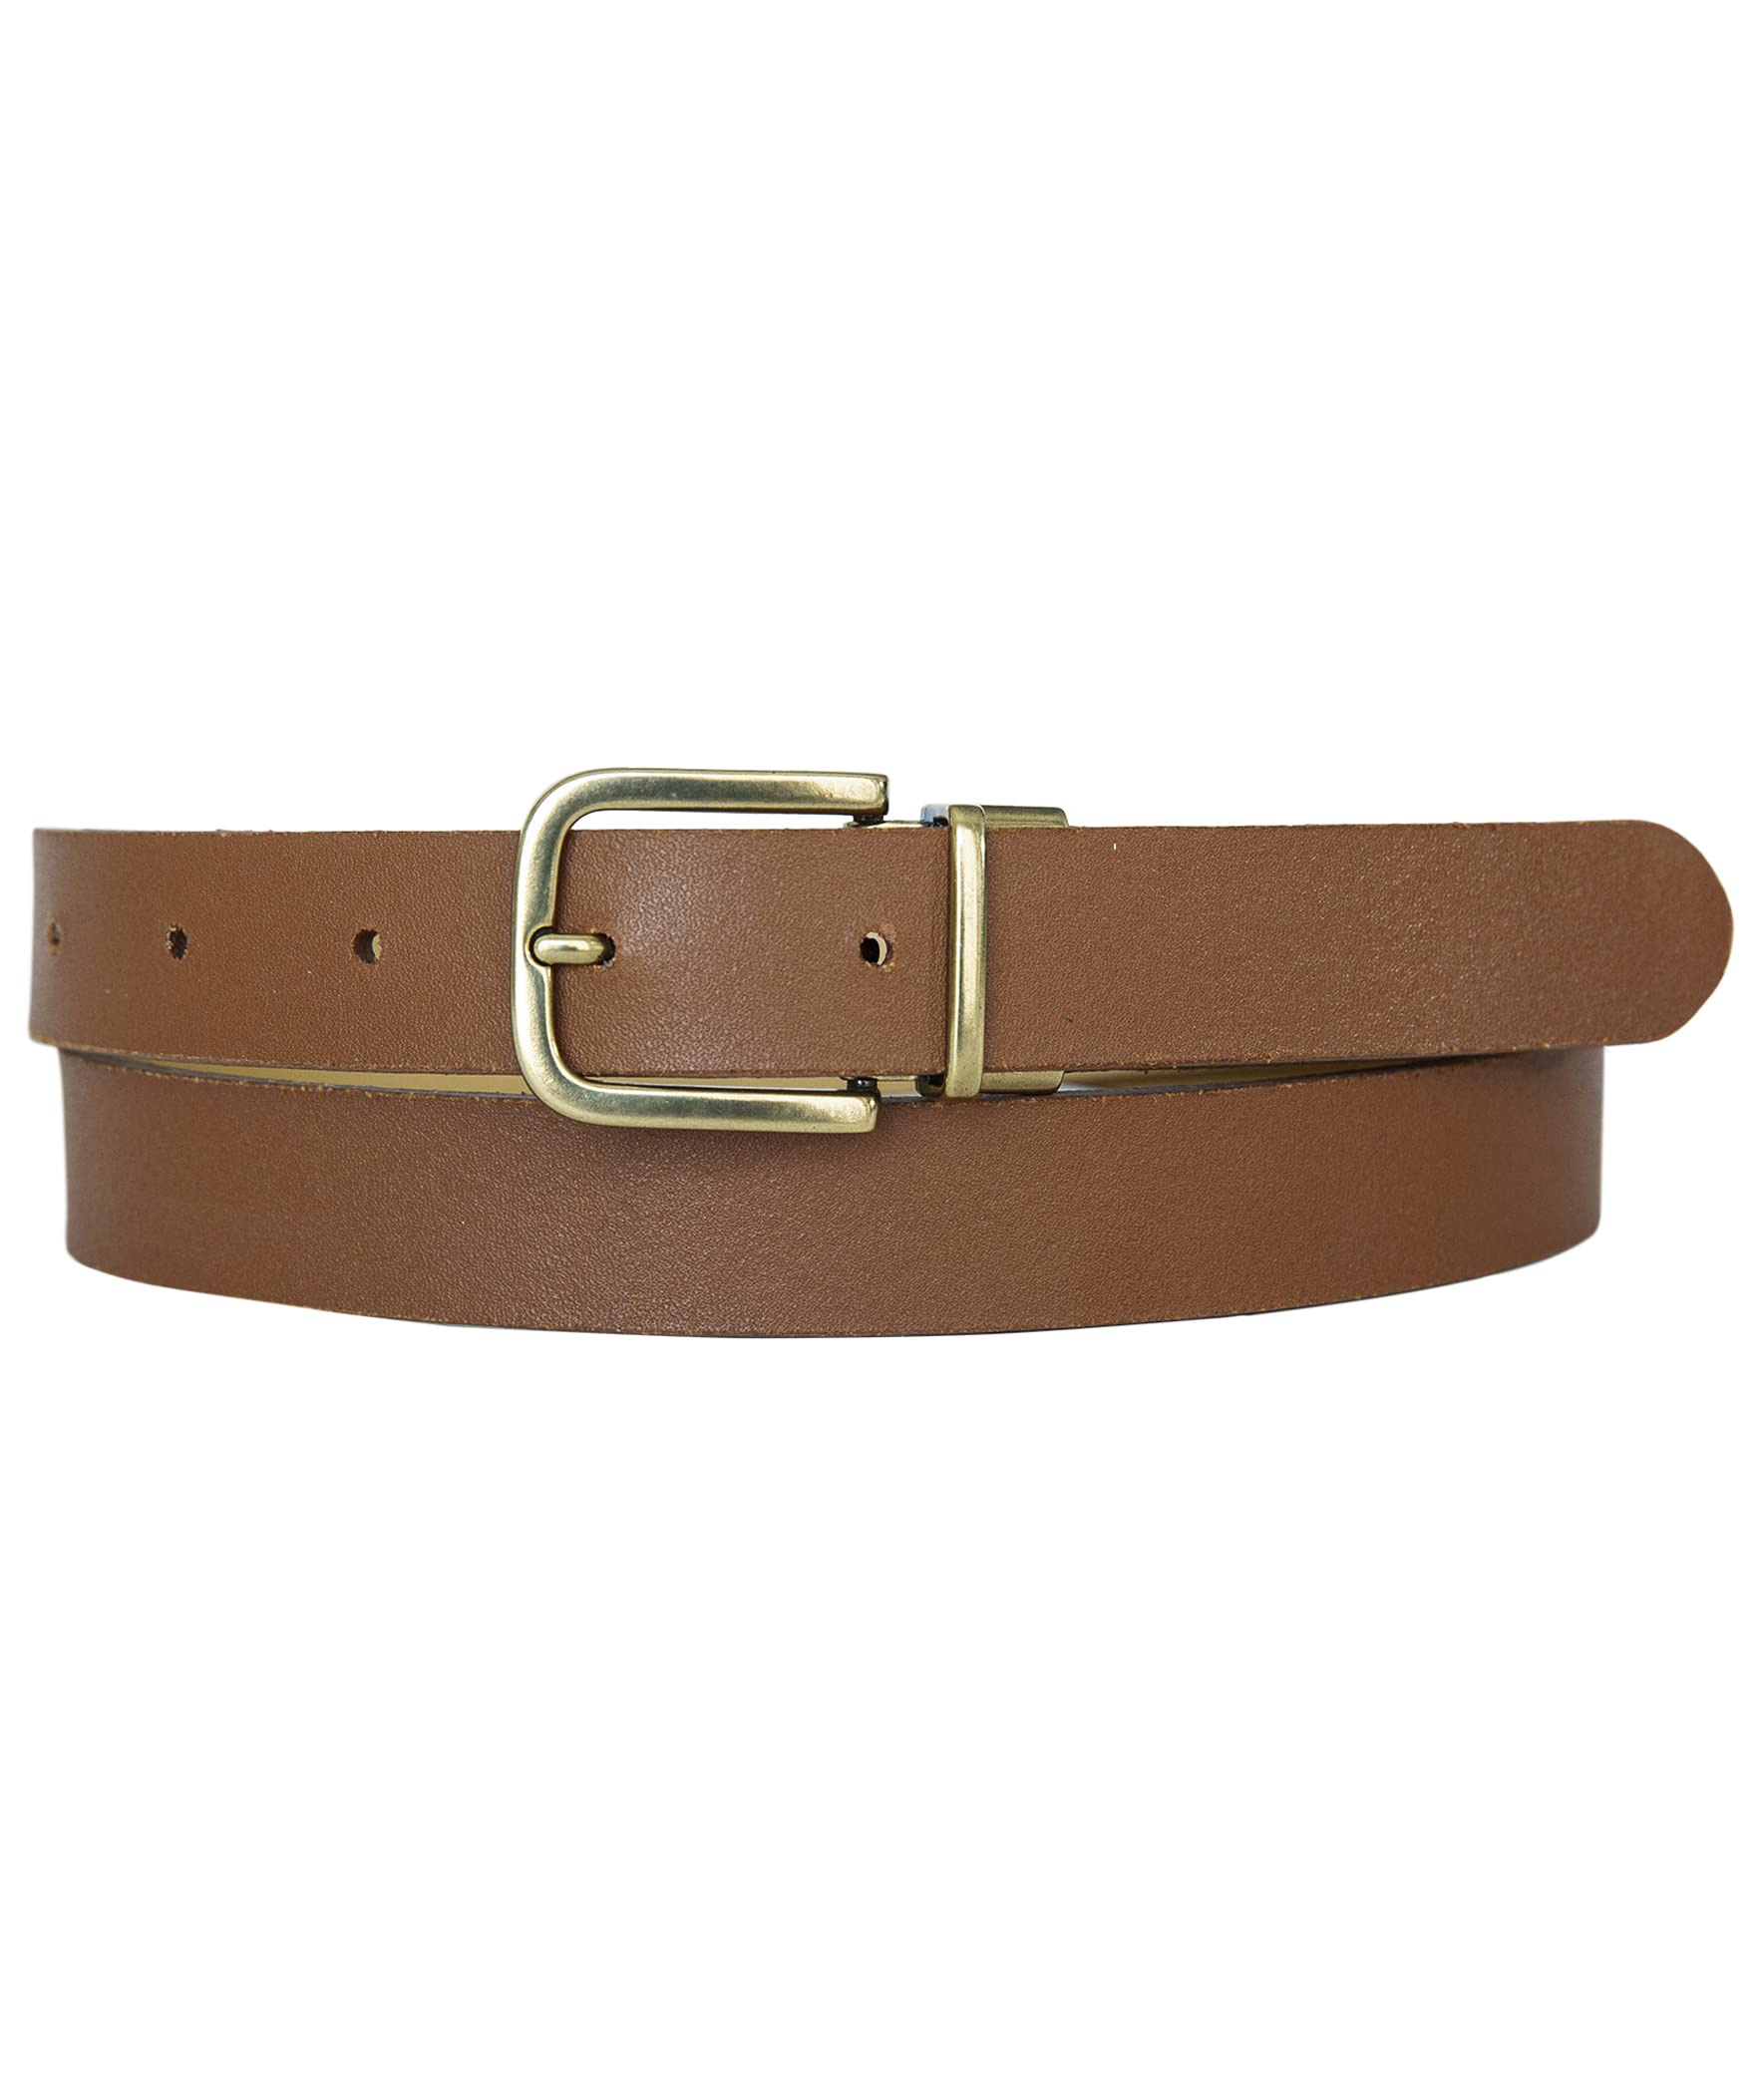 Lucky Brand Women's Reversible Smooth Leather Belt with Old English Brass Harness Buckle, Tan/Natural, Small